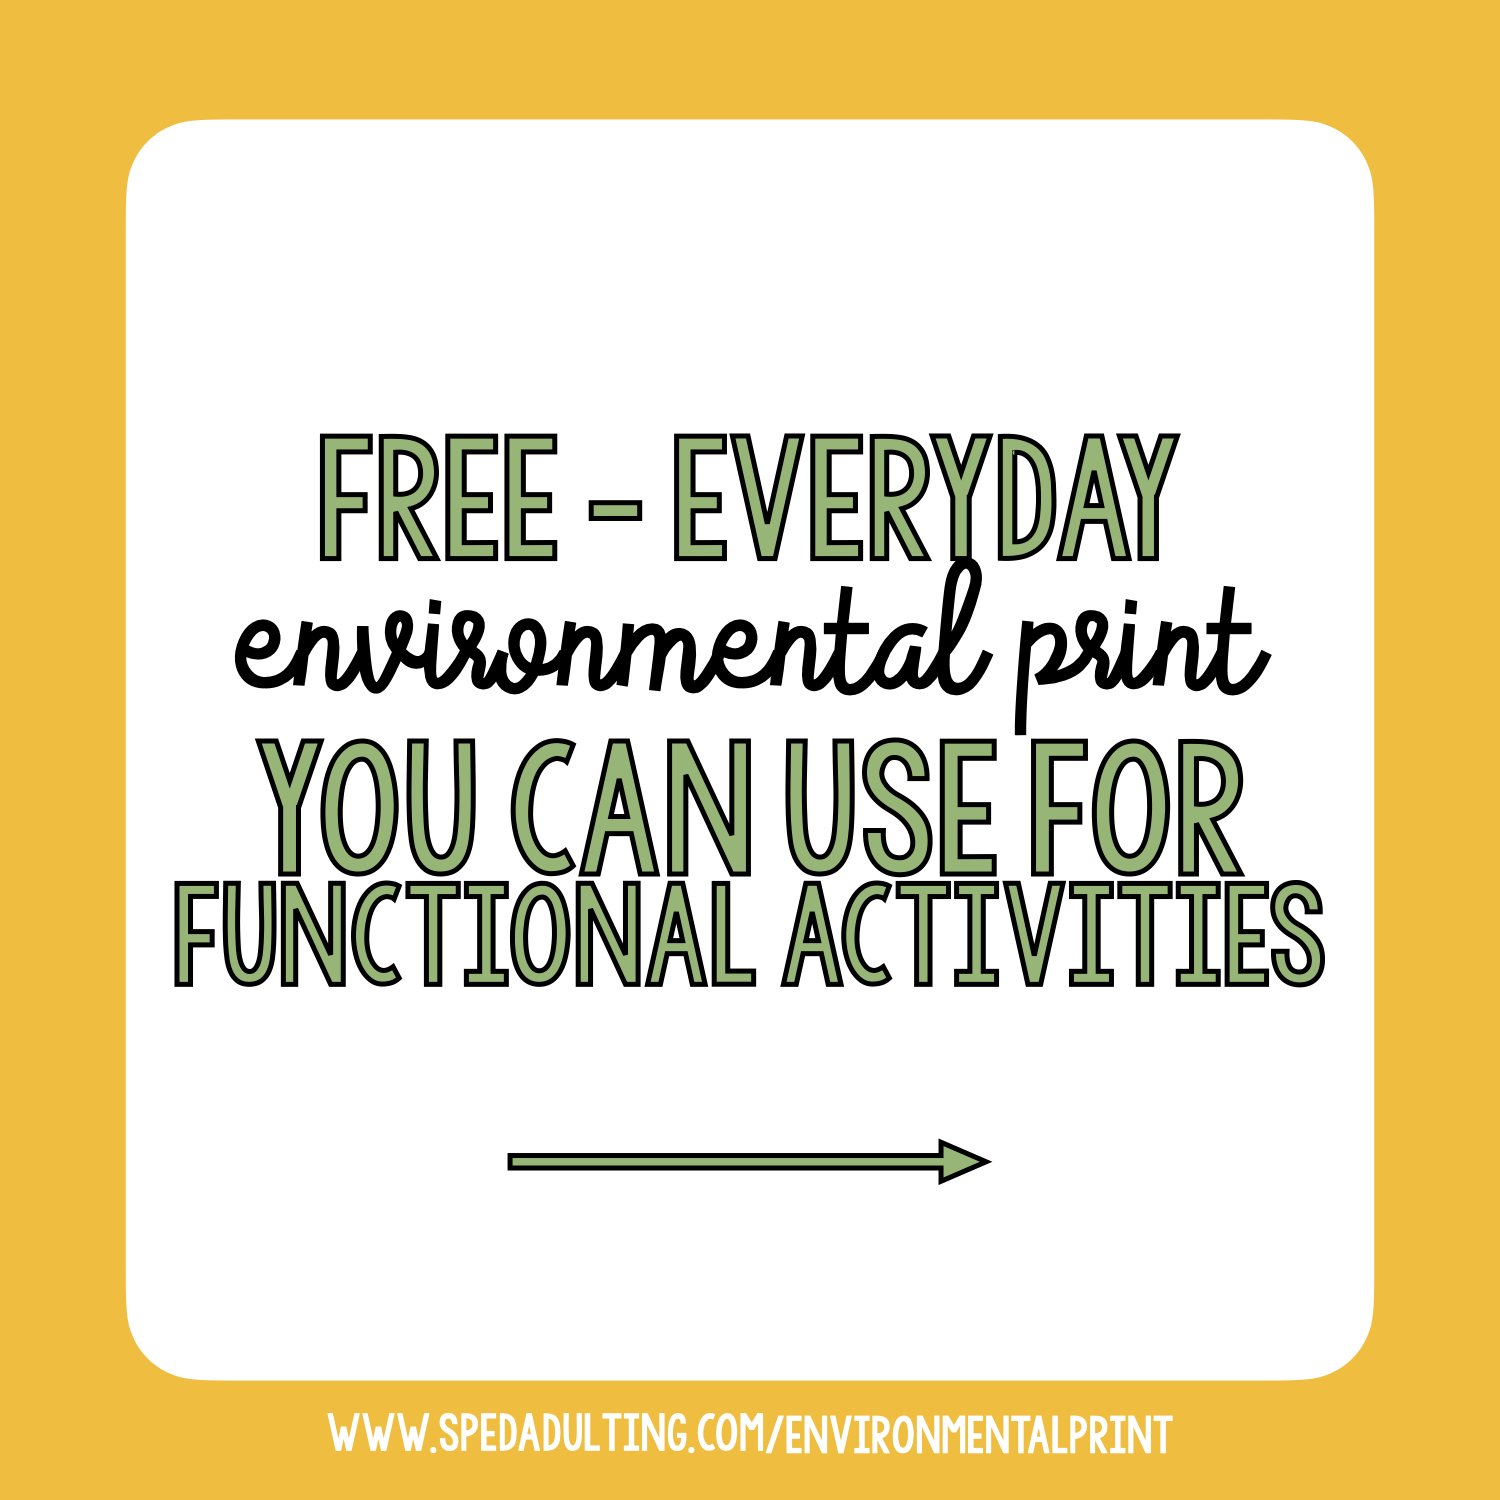 BLOG: FREE Everyday Environmental Print You Can Use for Functional Activities